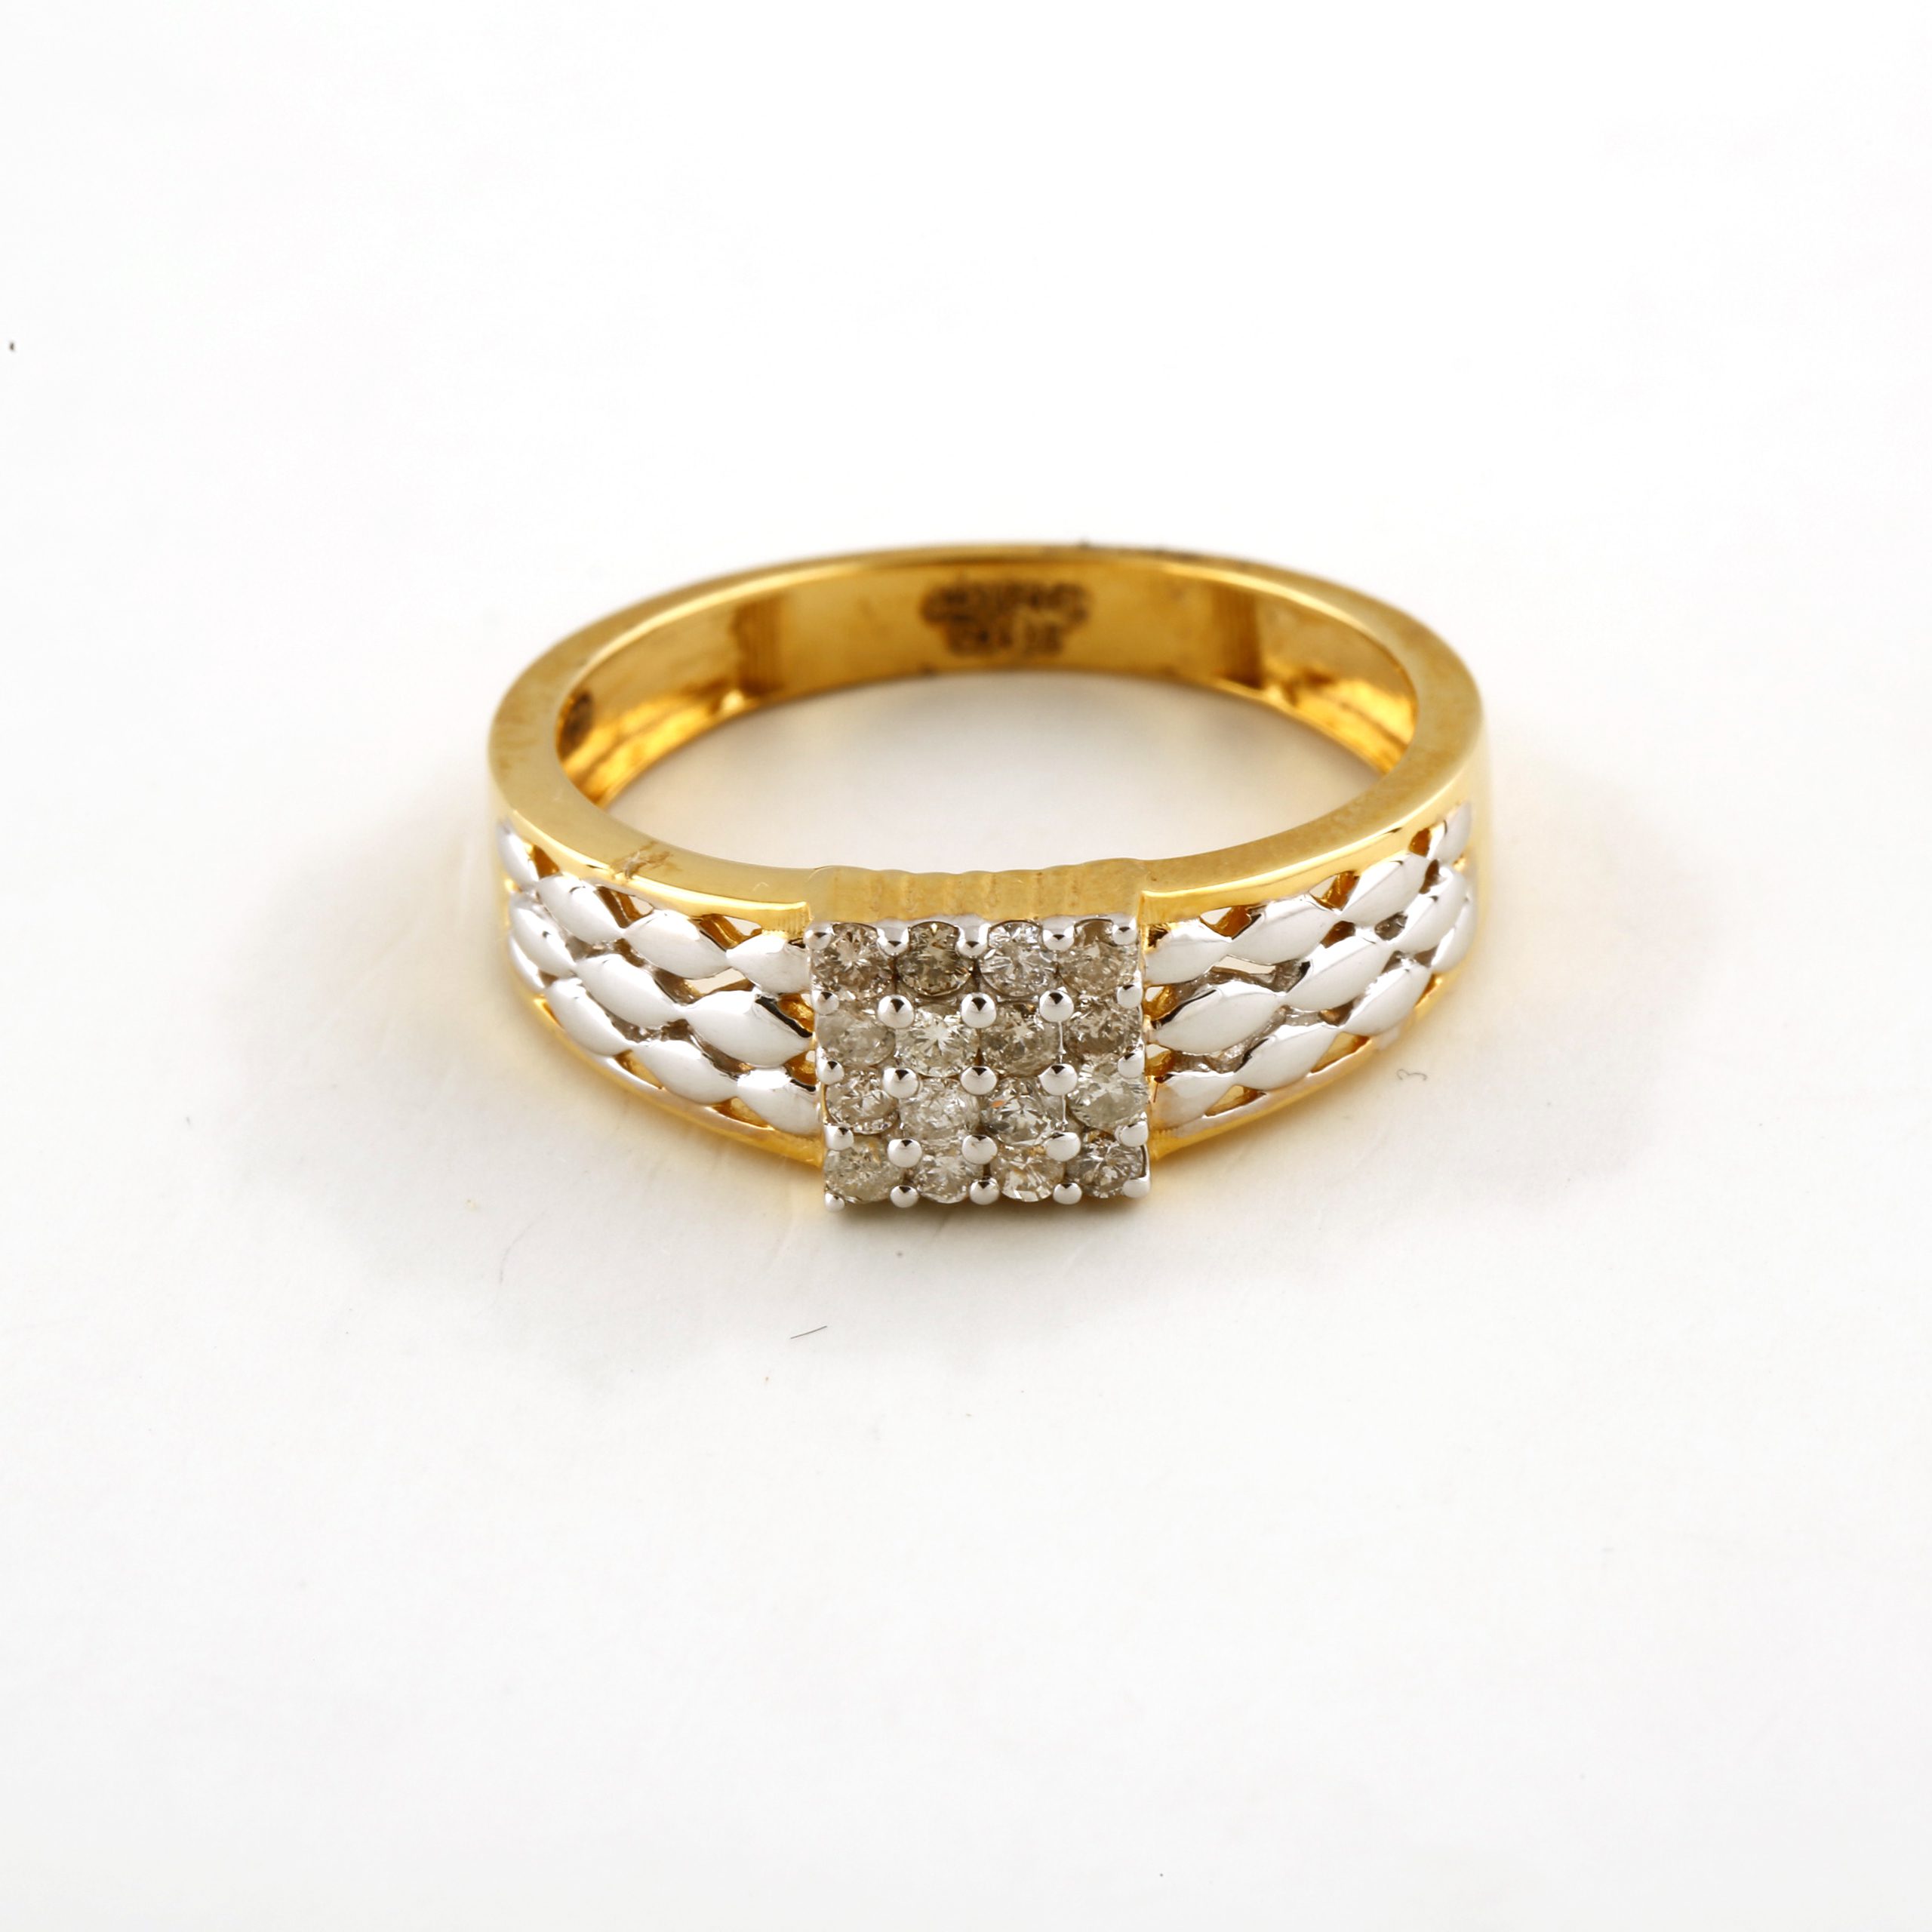 PDPAOLA™ at Zales Cubic Zirconia Ribbed Ring in Sterling Silver with 18K  Gold Plate | Zales